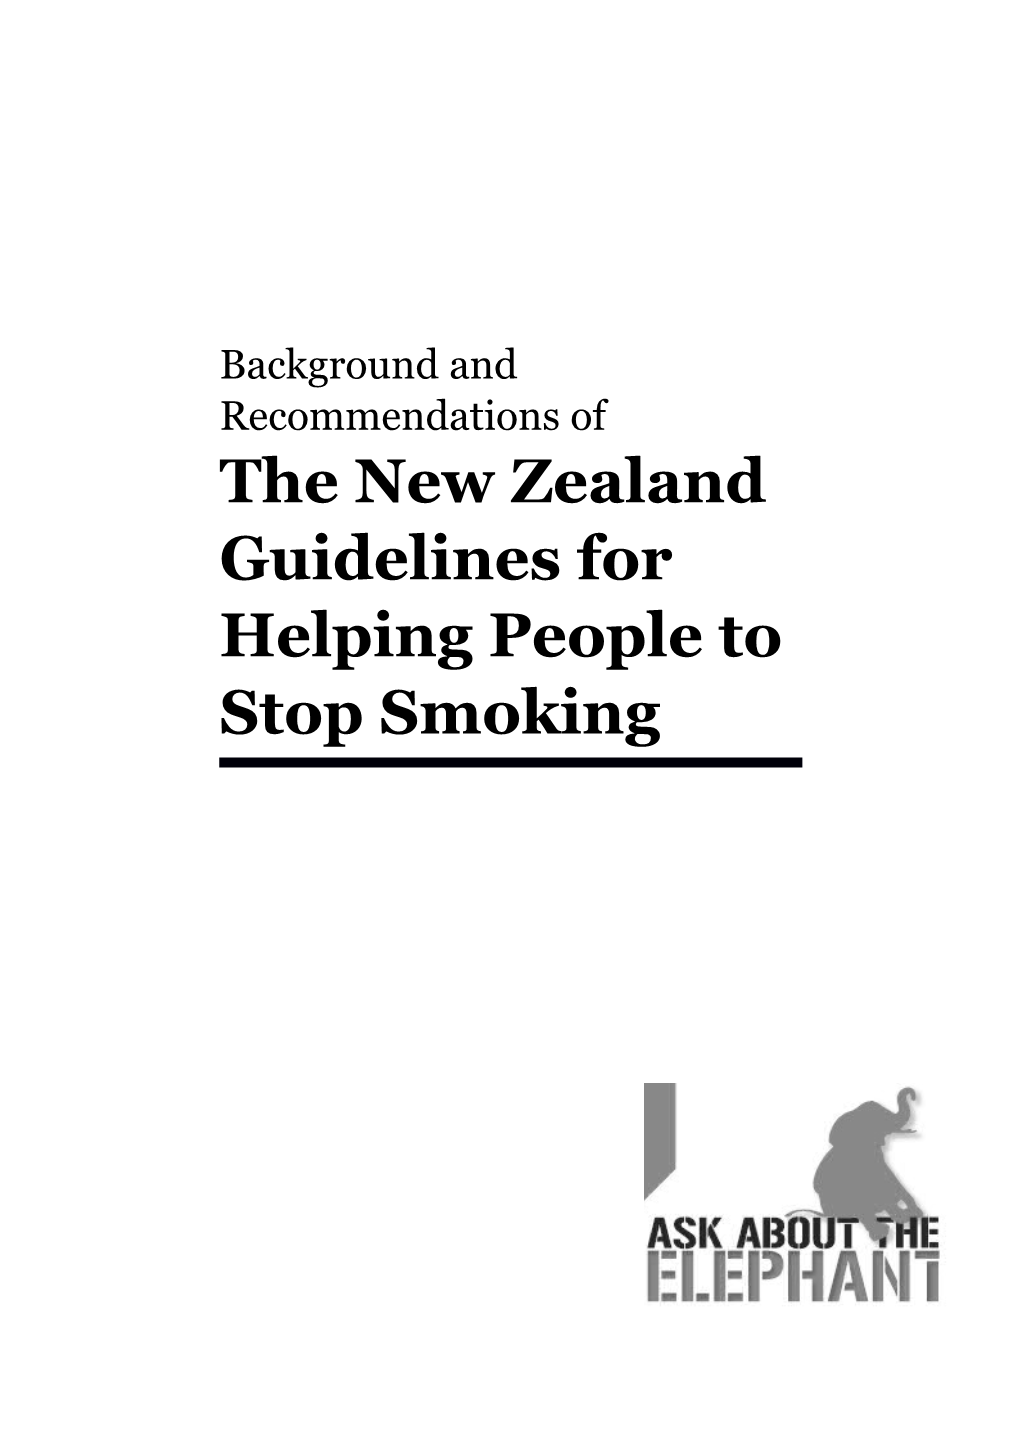 Background and Recommendations of the New Zealand Guidelines for Helping People to Stop Smoking